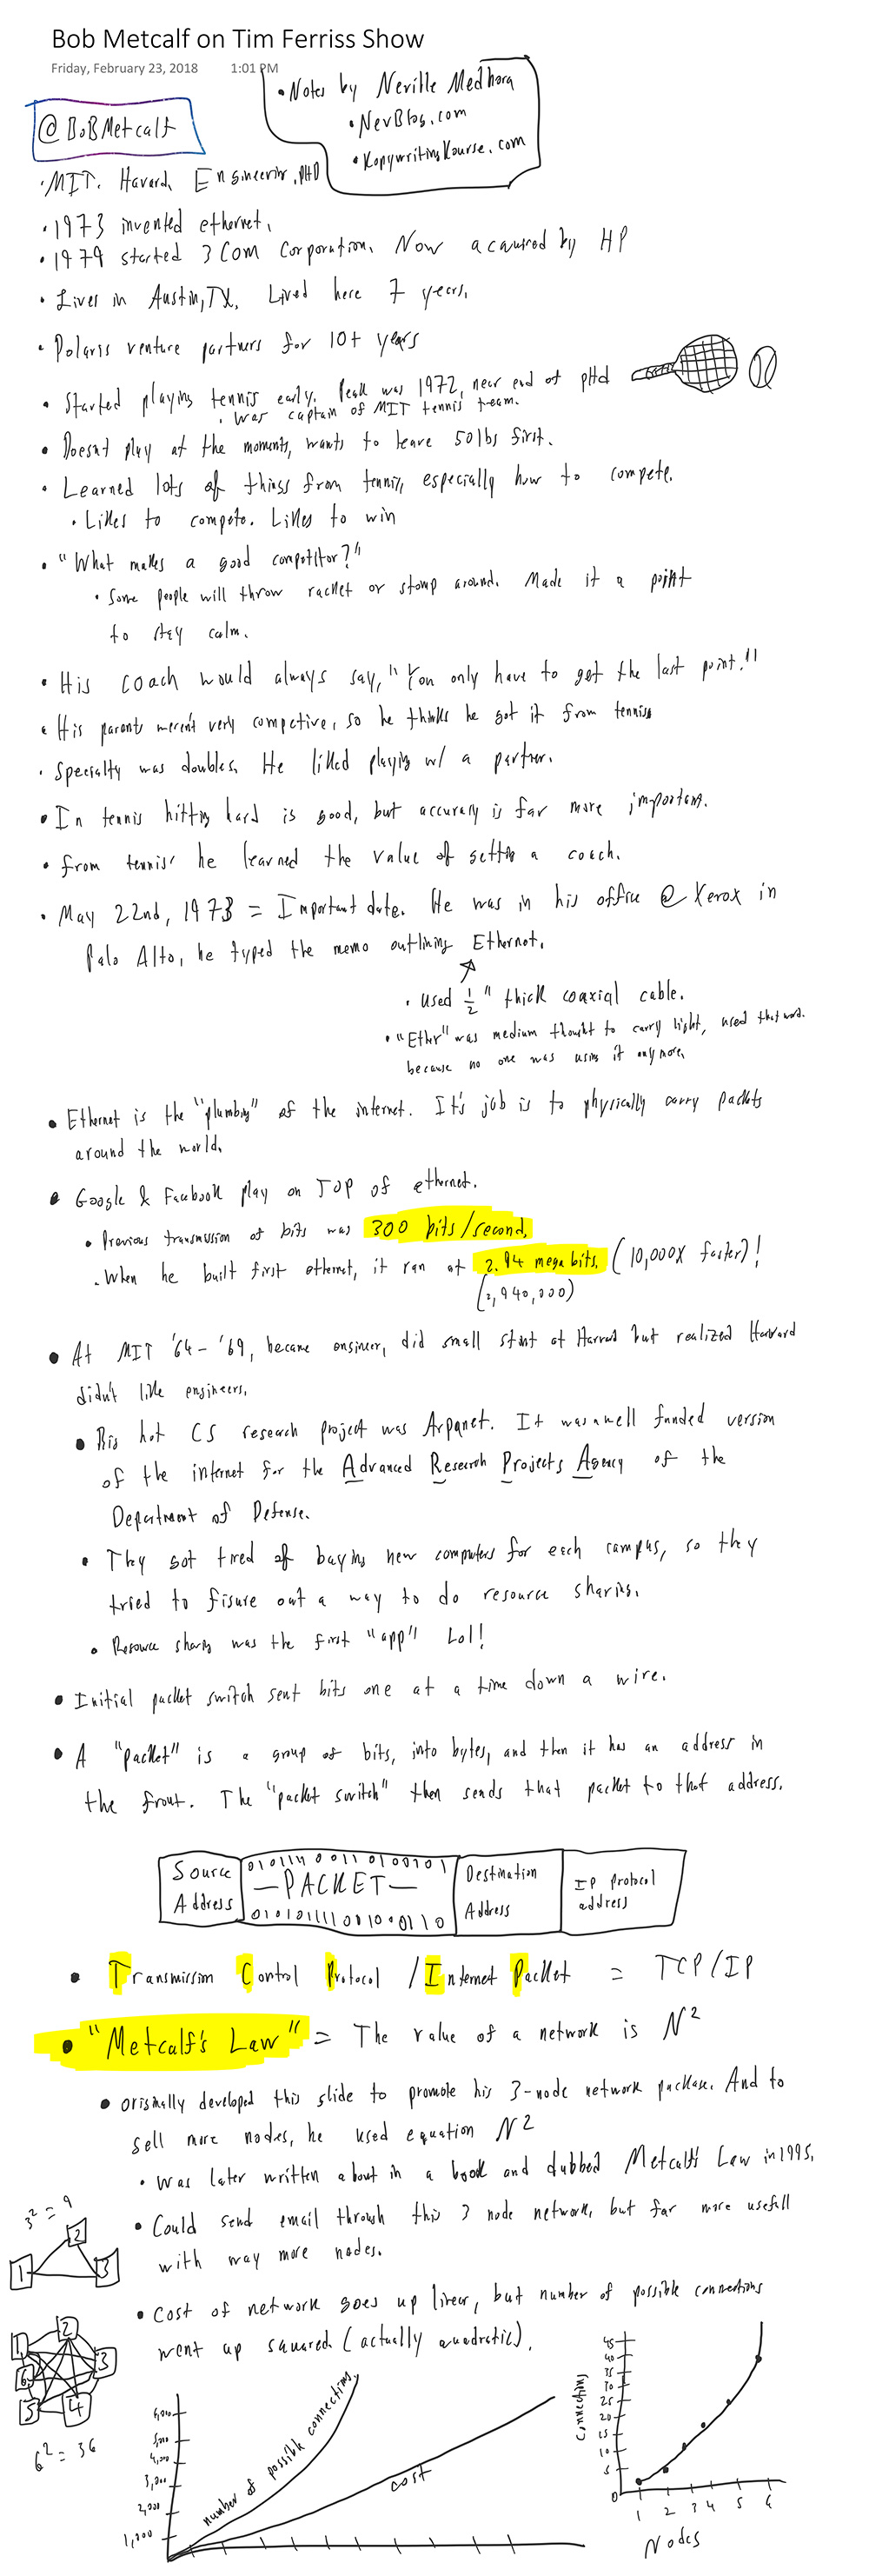 notes on Bob Metcalf Tim Ferriss podcast